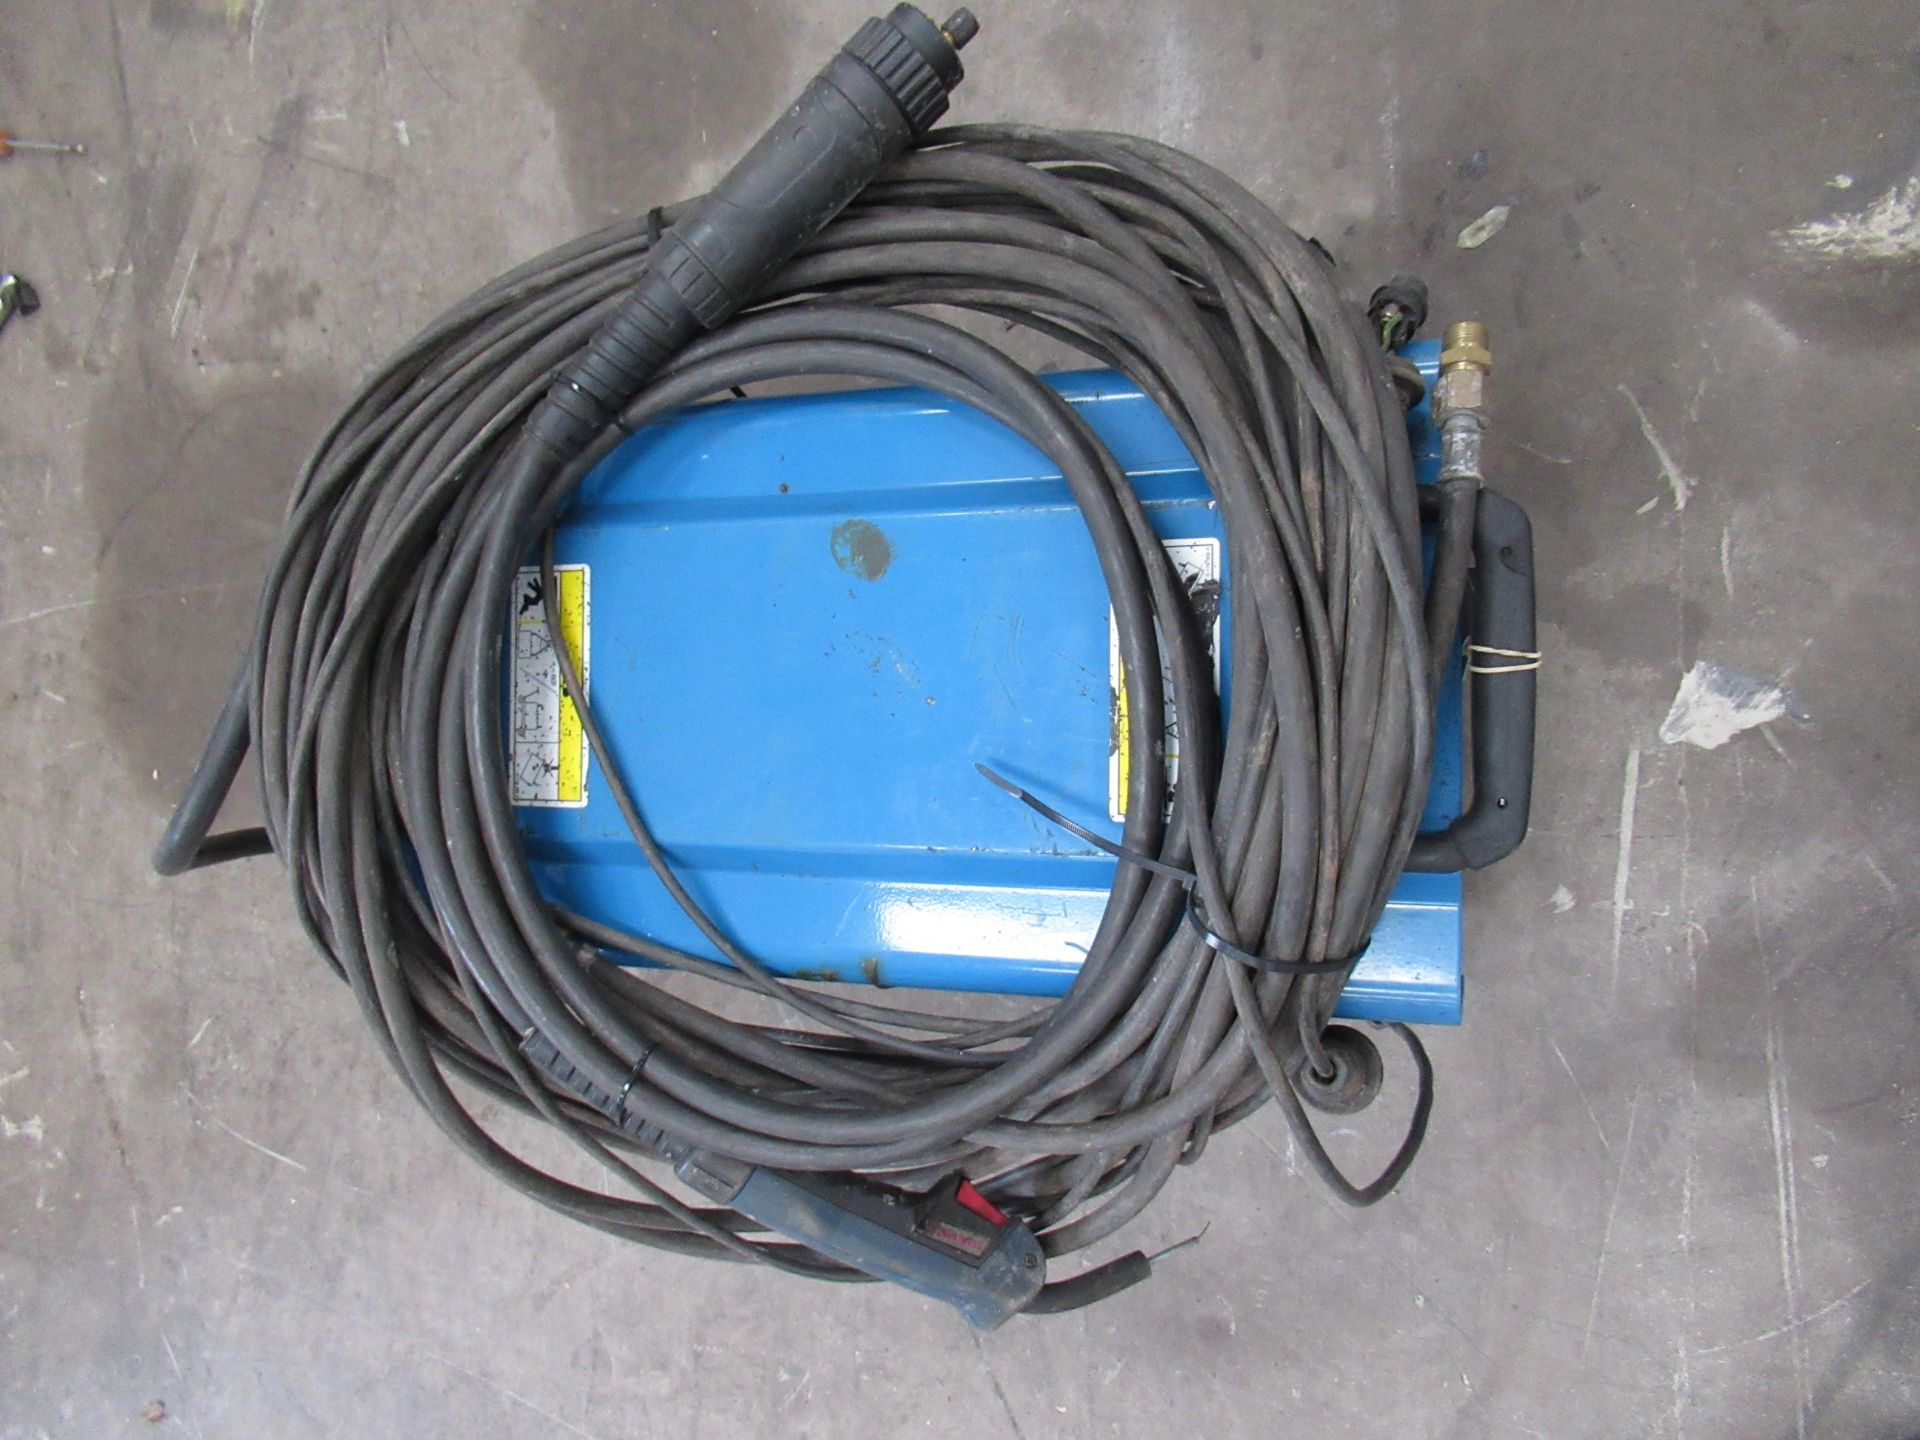 Miller XMT 304 series DC inverter welder with leads etc - Image 6 of 9